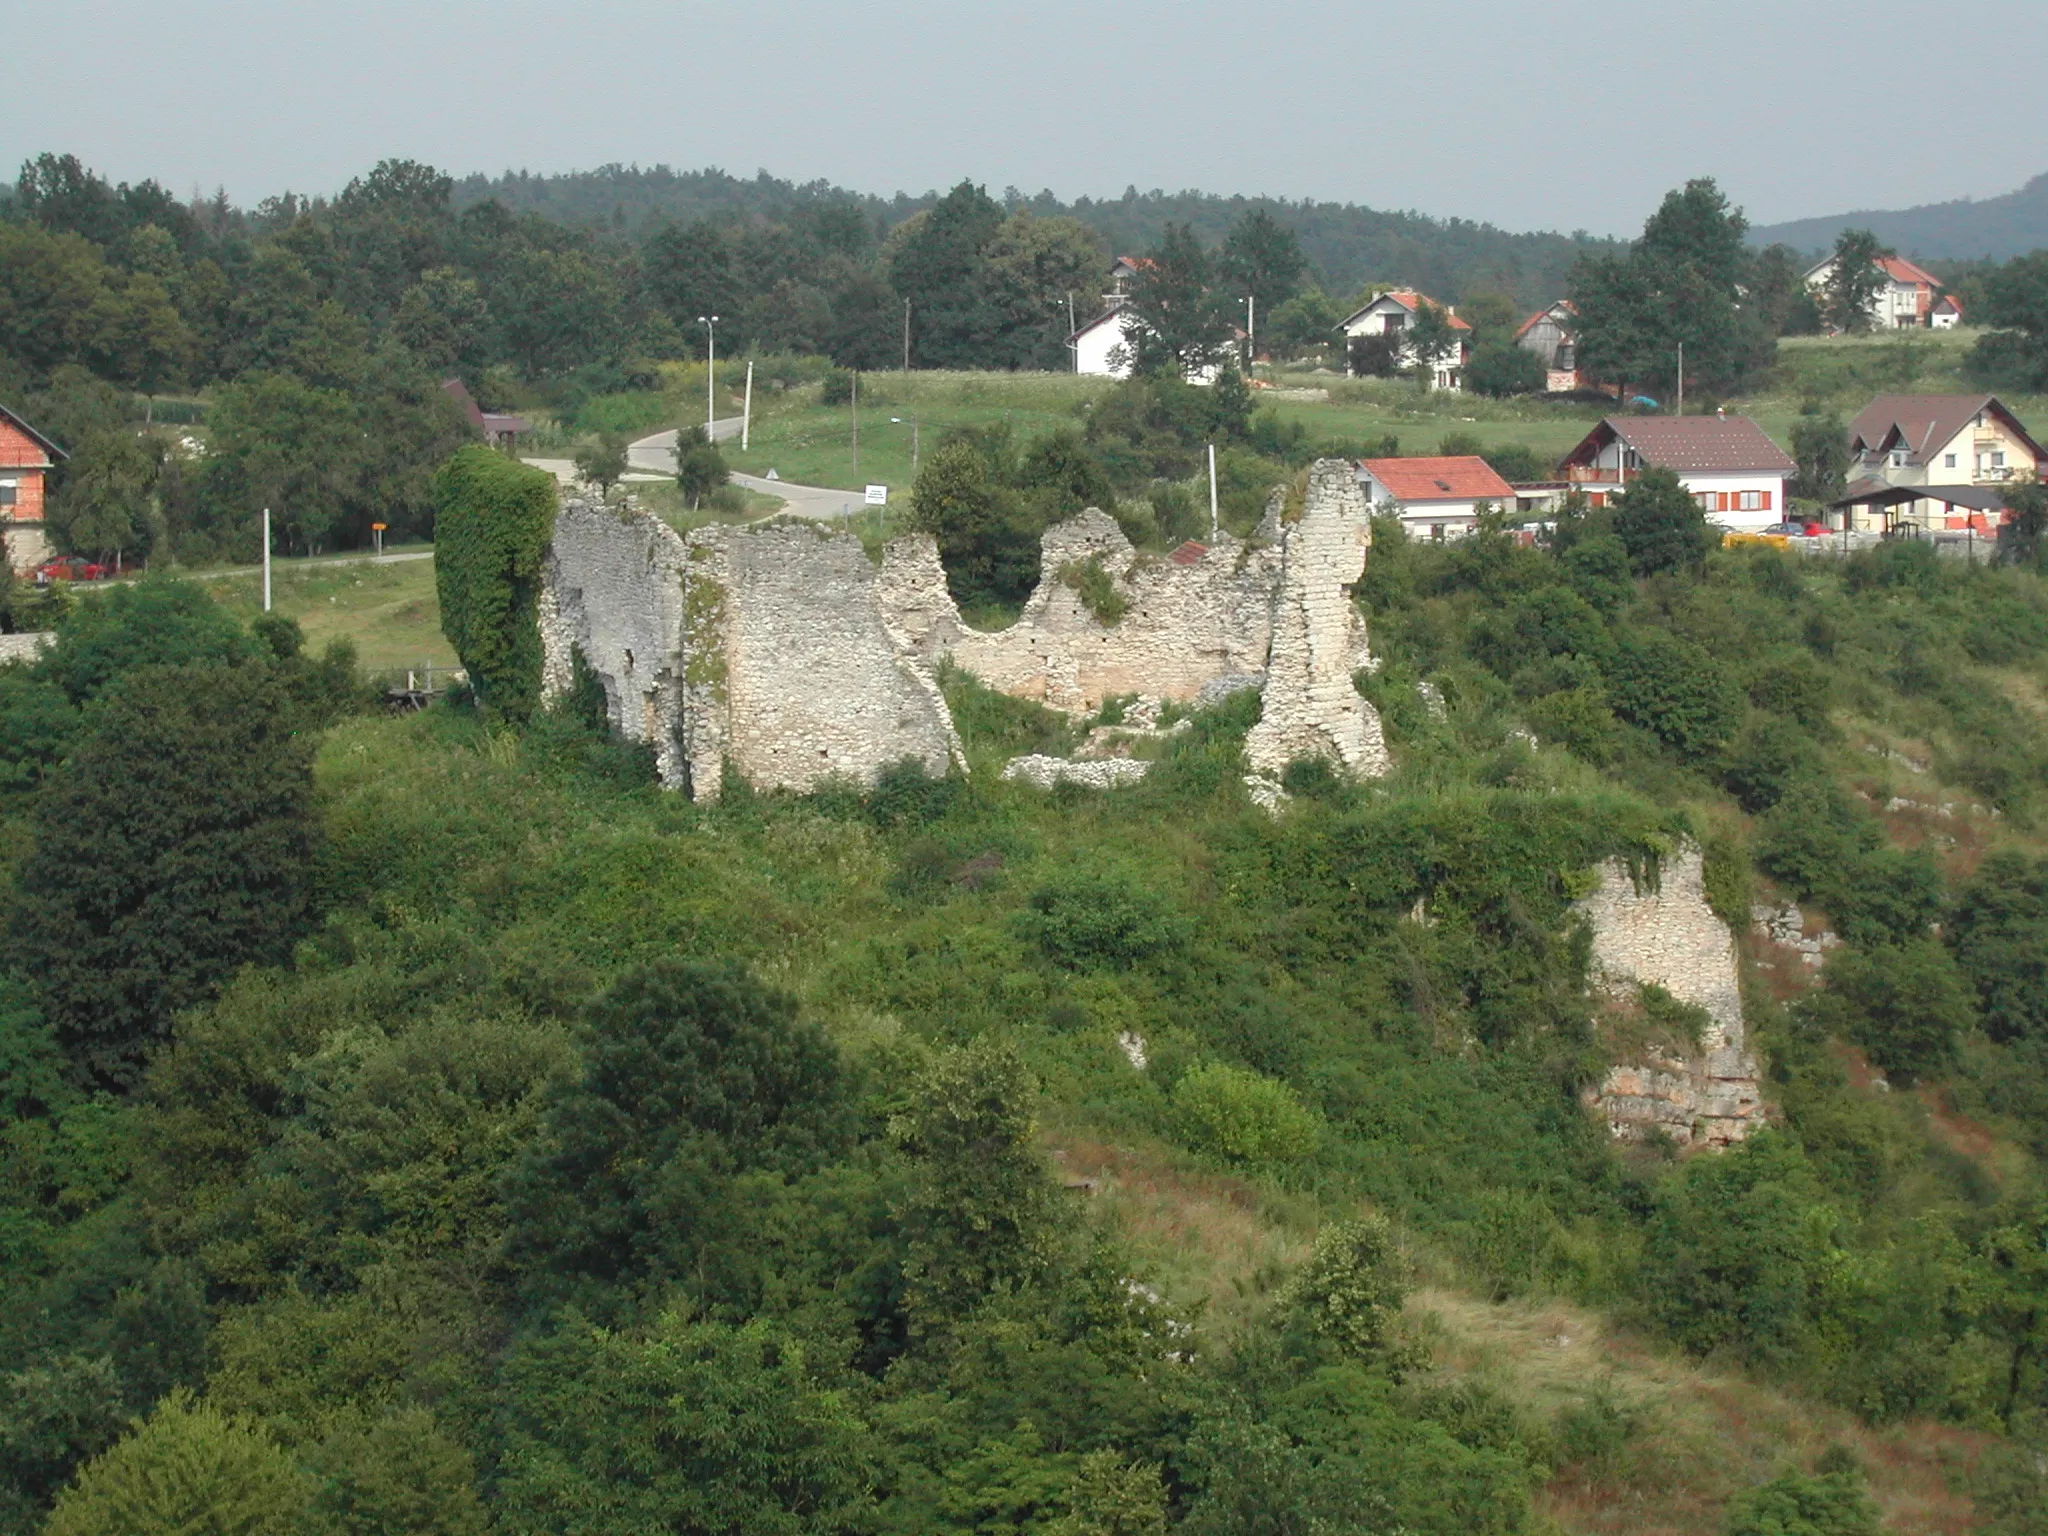 Photo showing: The Old fortification of the Frankopans in Slunj, Croatia. Photographed in the summer of 2004 from User neoneo13 for Wikipedia.